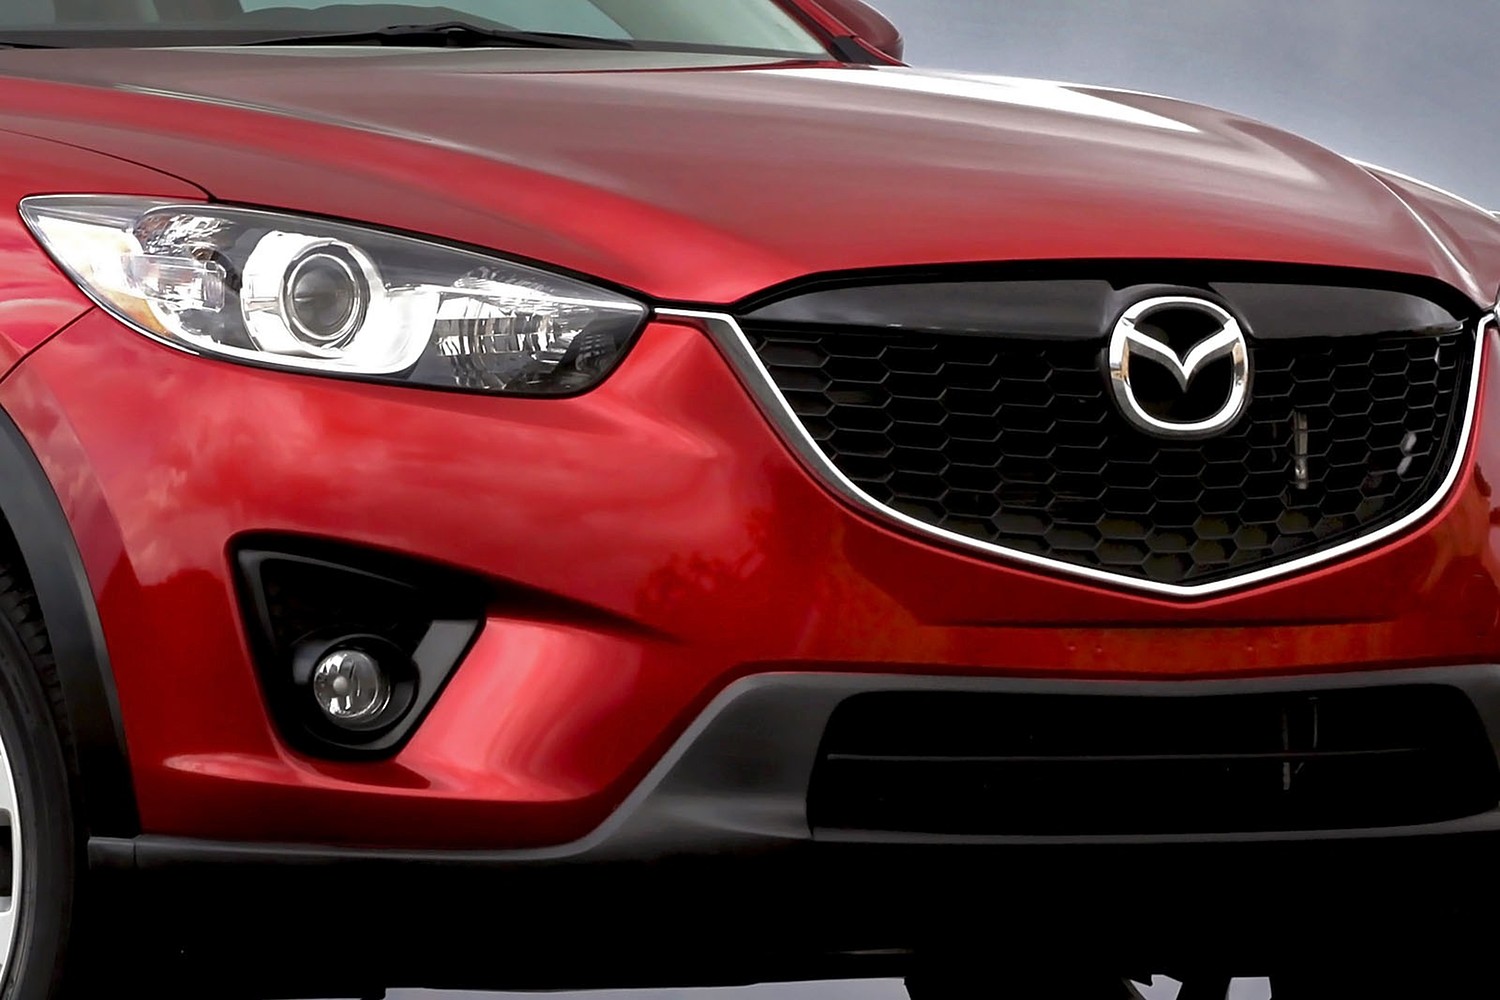 Mazda CX-5 Grand Touring 4dr SUV Front Badge (2013 model year shown)